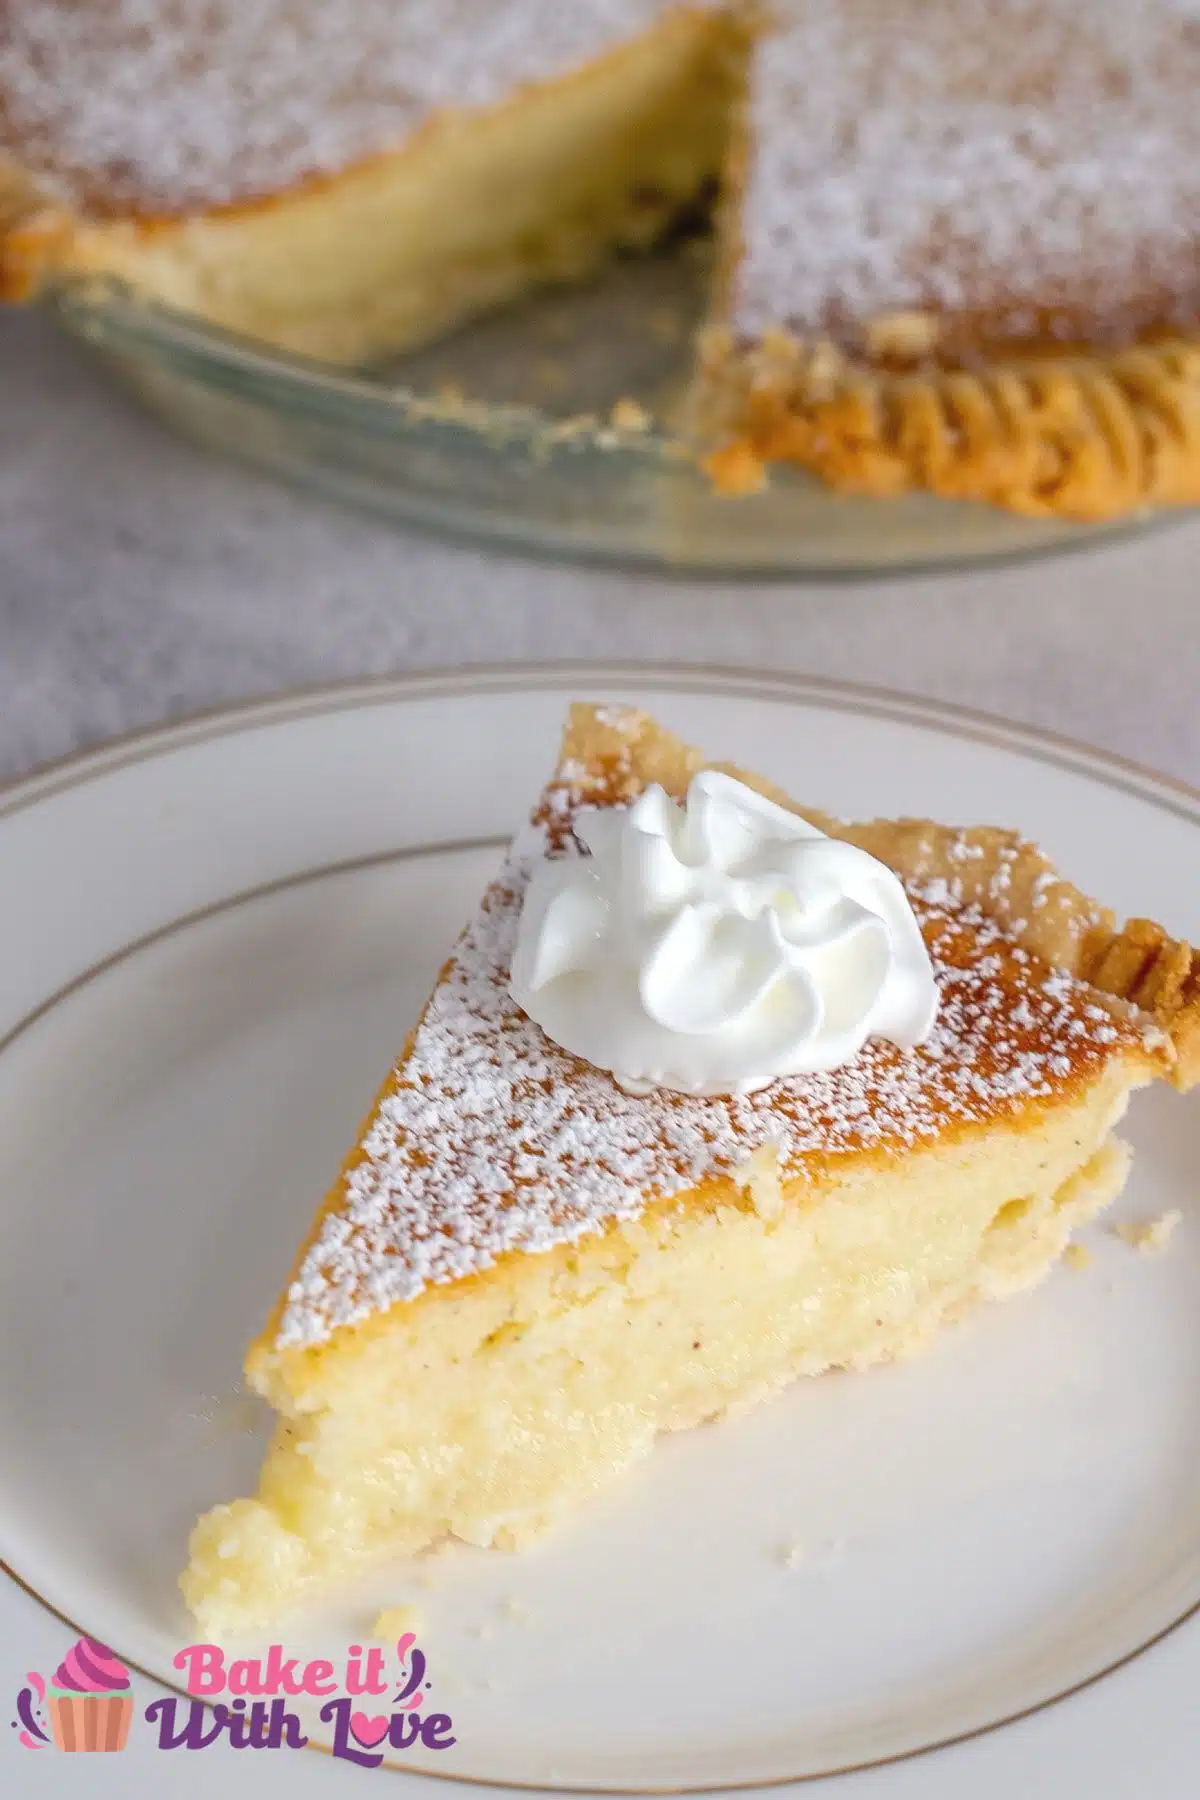 Tall image showing a slice of buttermilk pie.